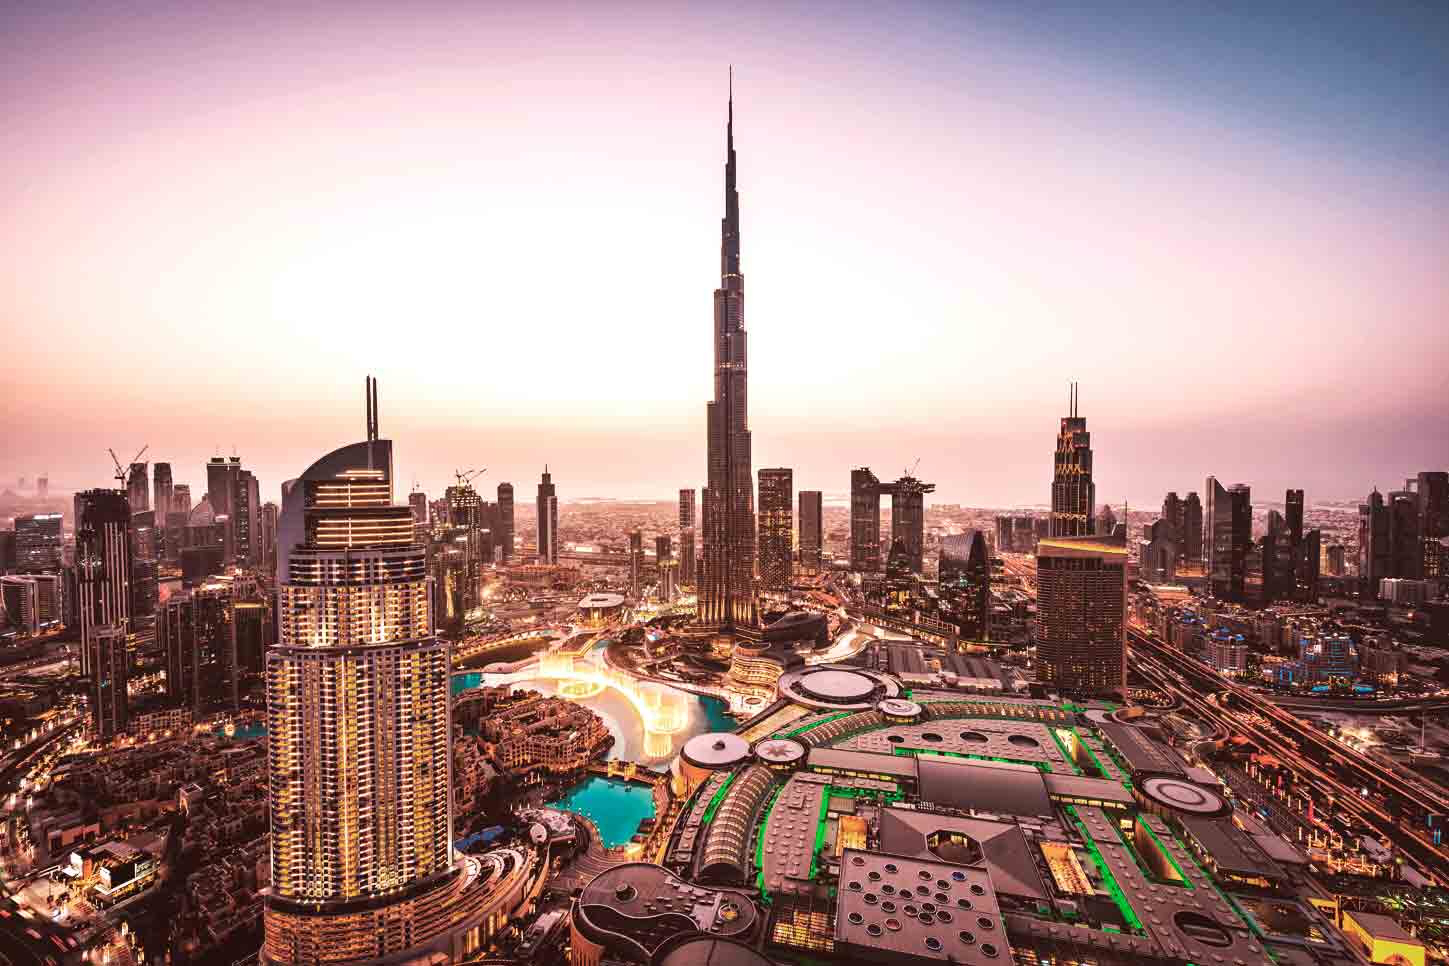 Fill your stopover in Dubai with exciting and fun things to do in the city of gold.